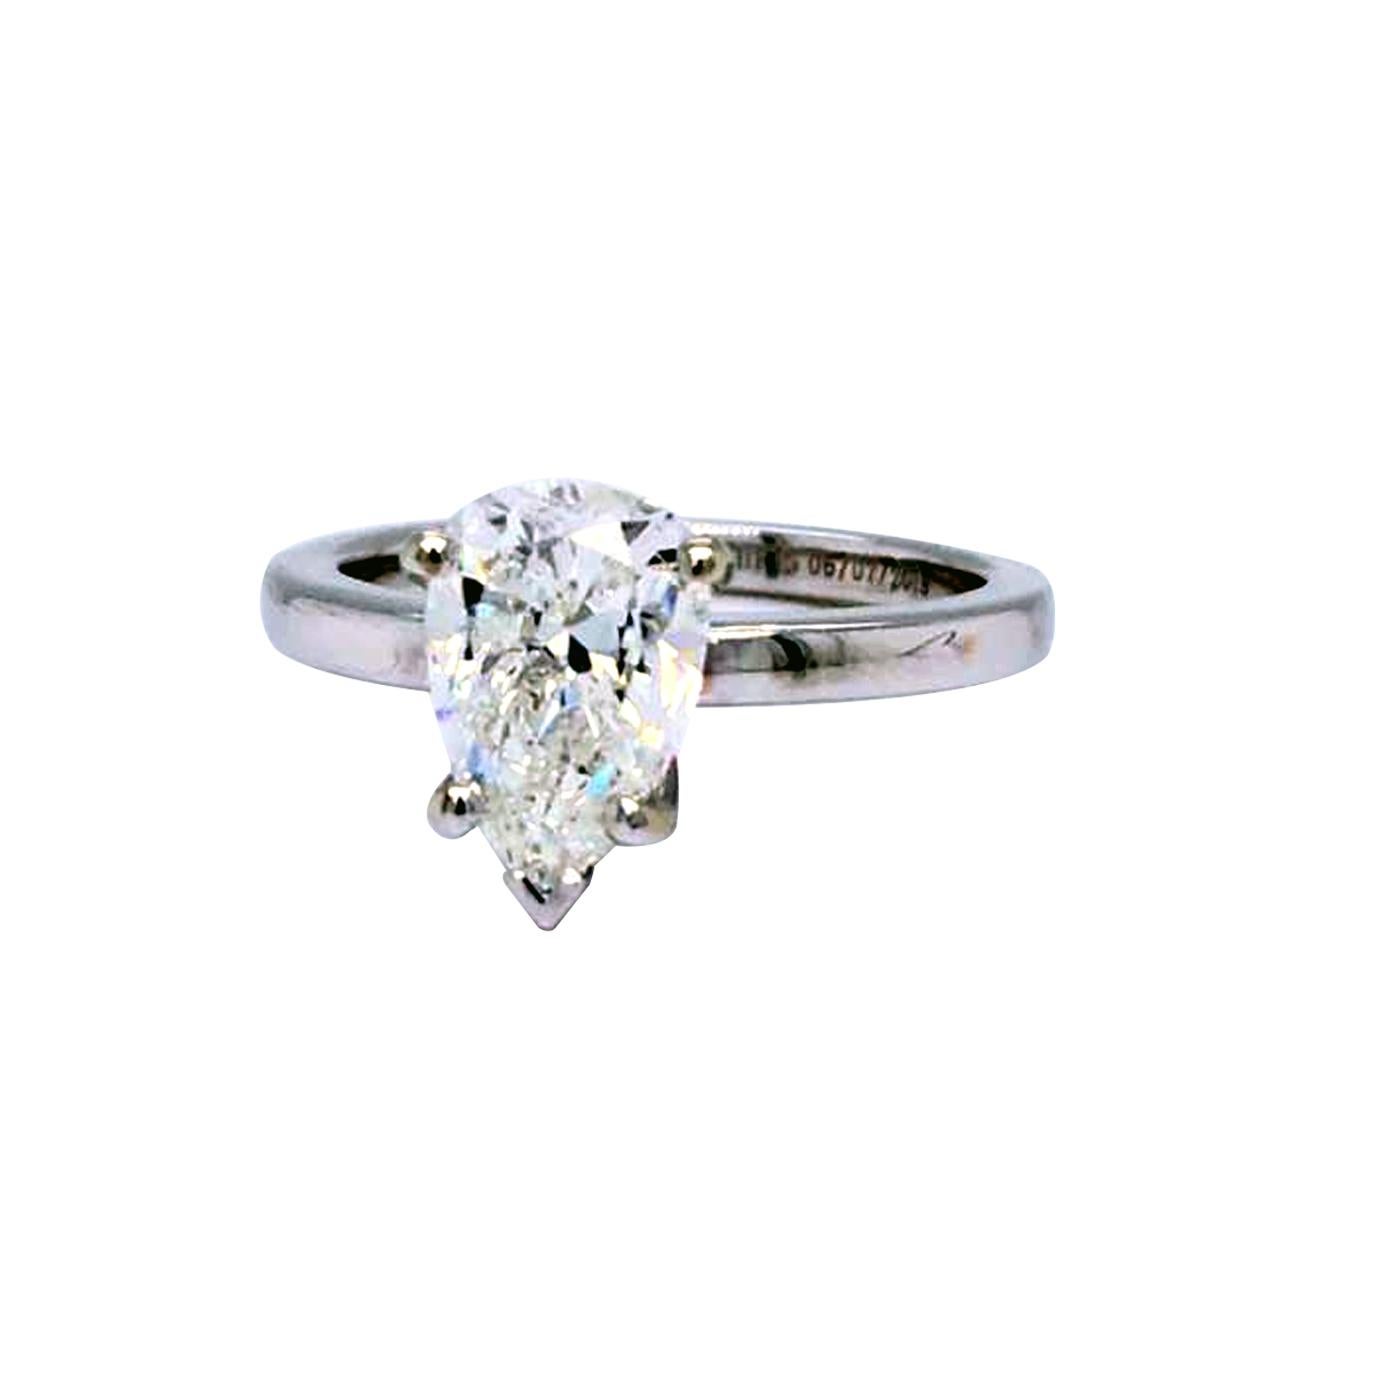 Classic Diamond ring, Sparkling, Pear Shape 1.92 carat center diamond encased with 4 prongs with G Color and Si1 Clarity with Total Weight of 1.92ct Beautiful design set in 18K White Gold ideal for weddings, engagements.

Details:
Center Carat